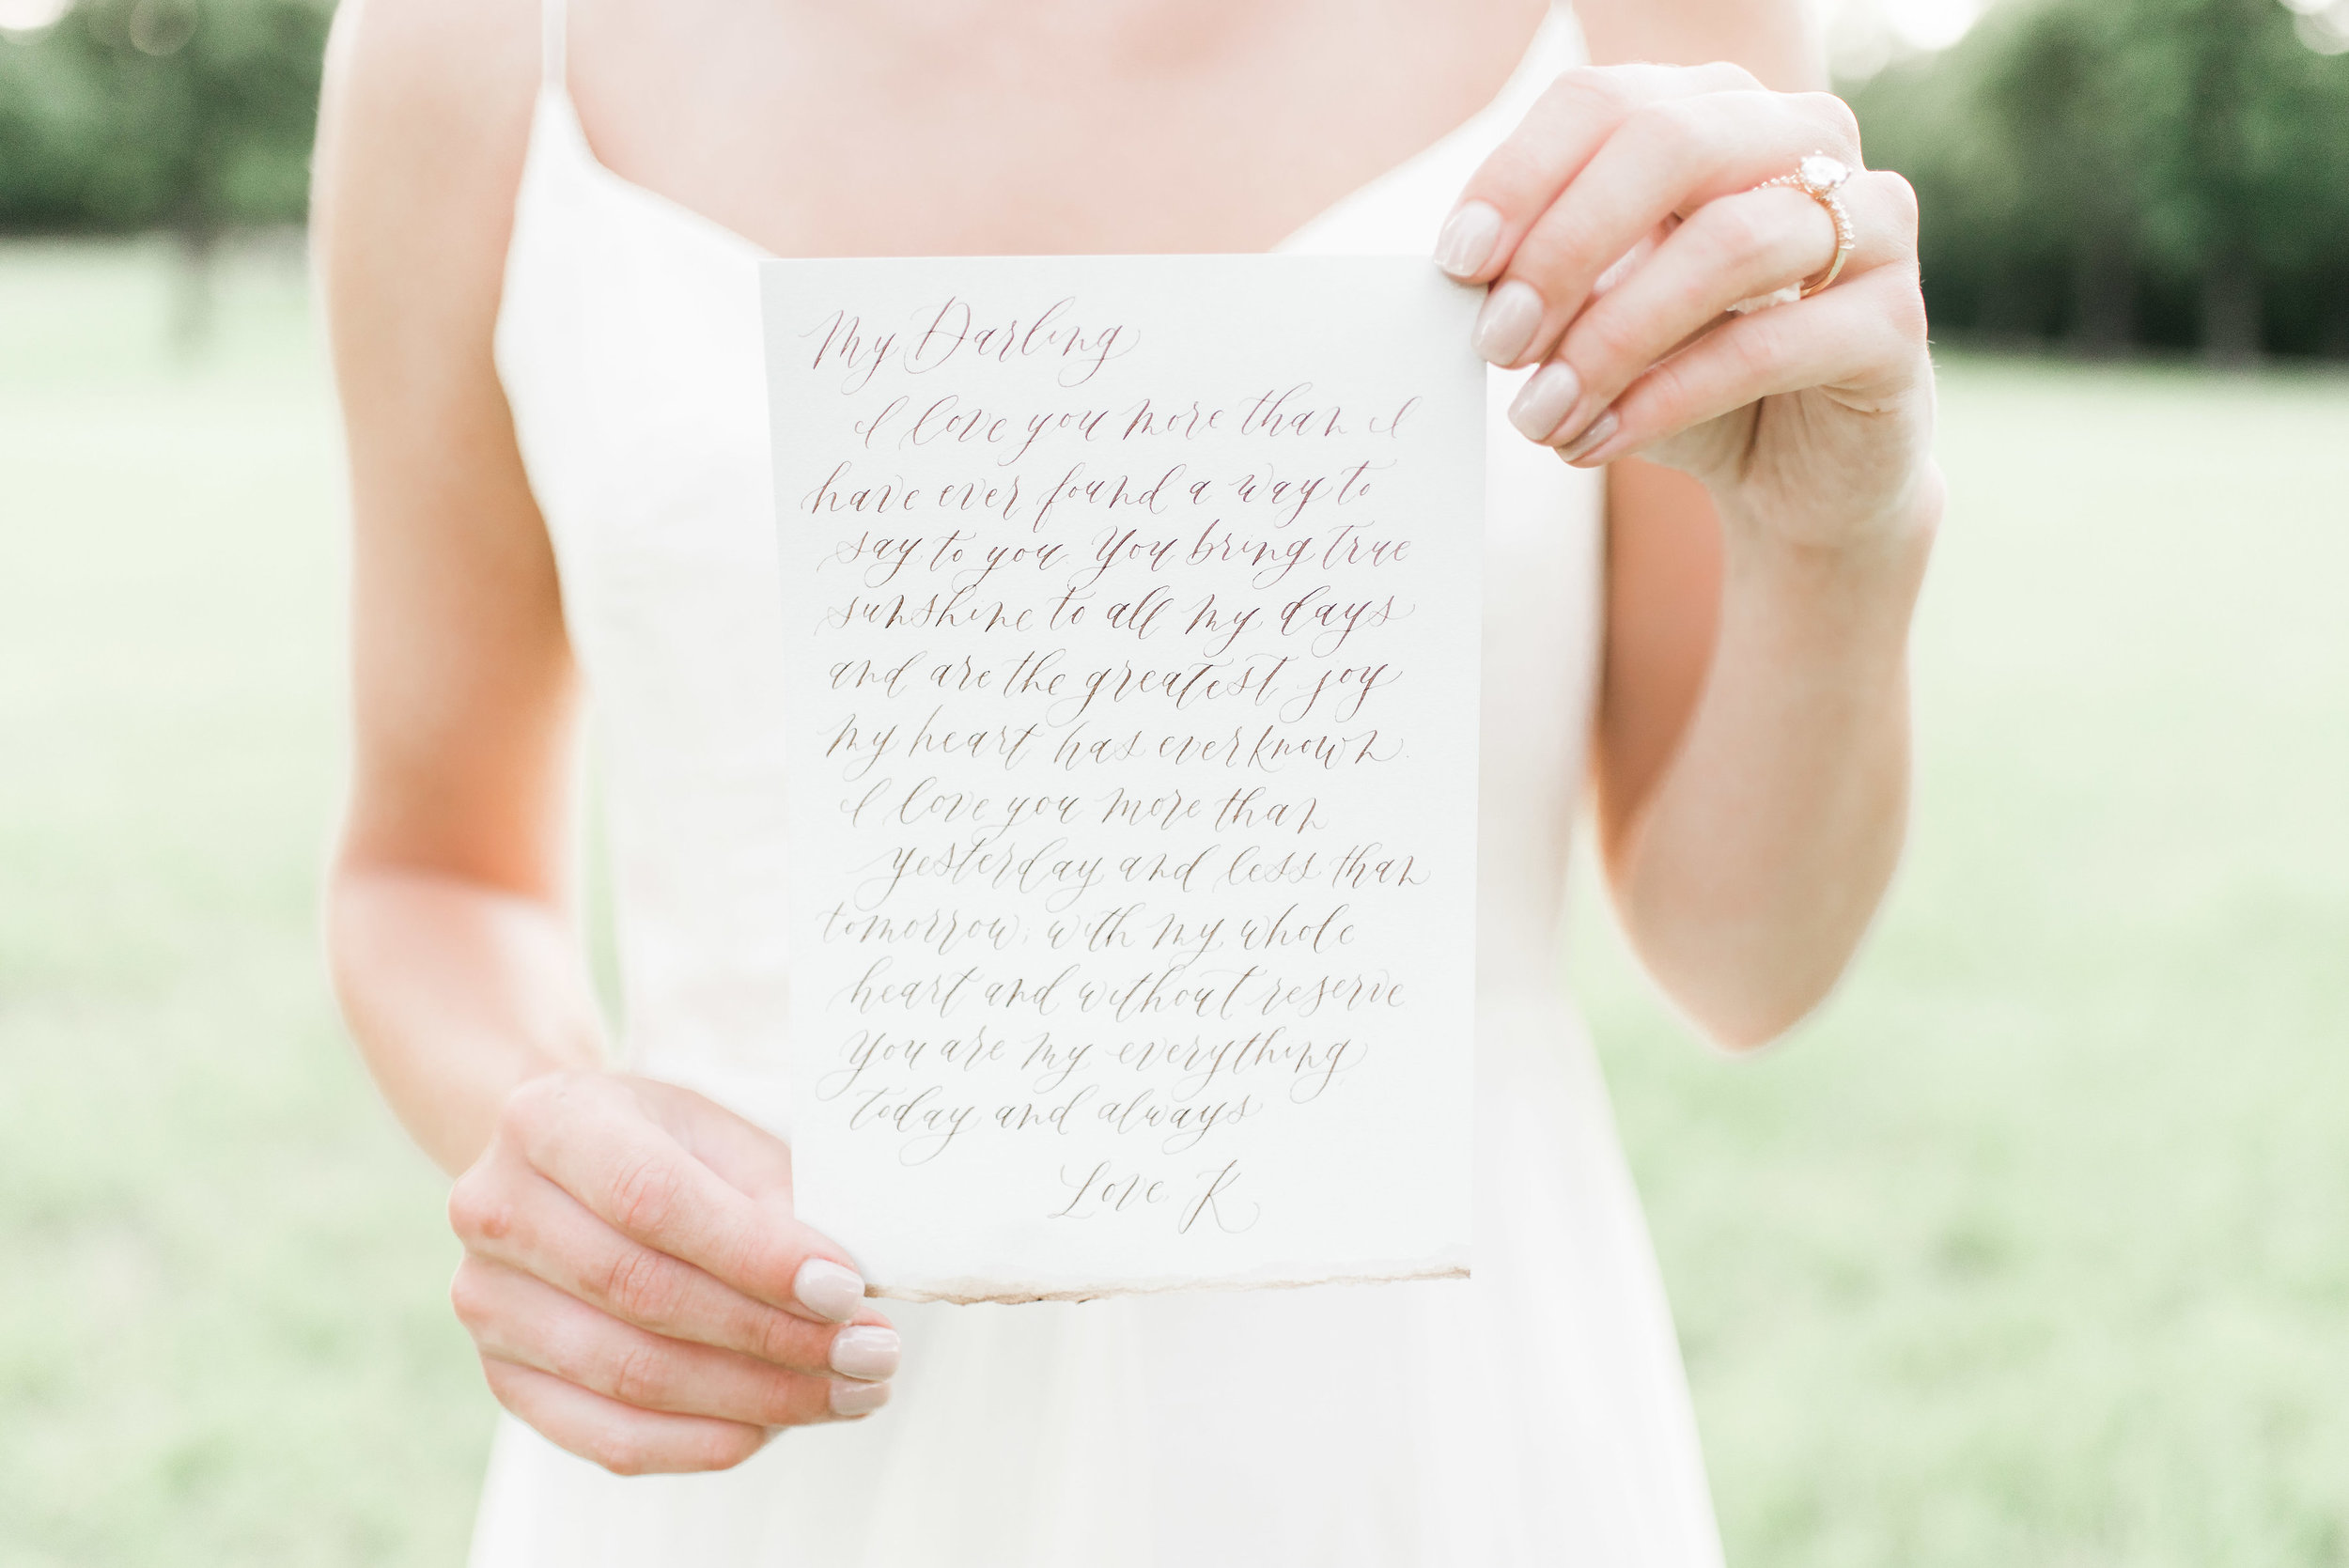 Lost For Words Tips For Writing A Wedding Day Letter Spoken Bride